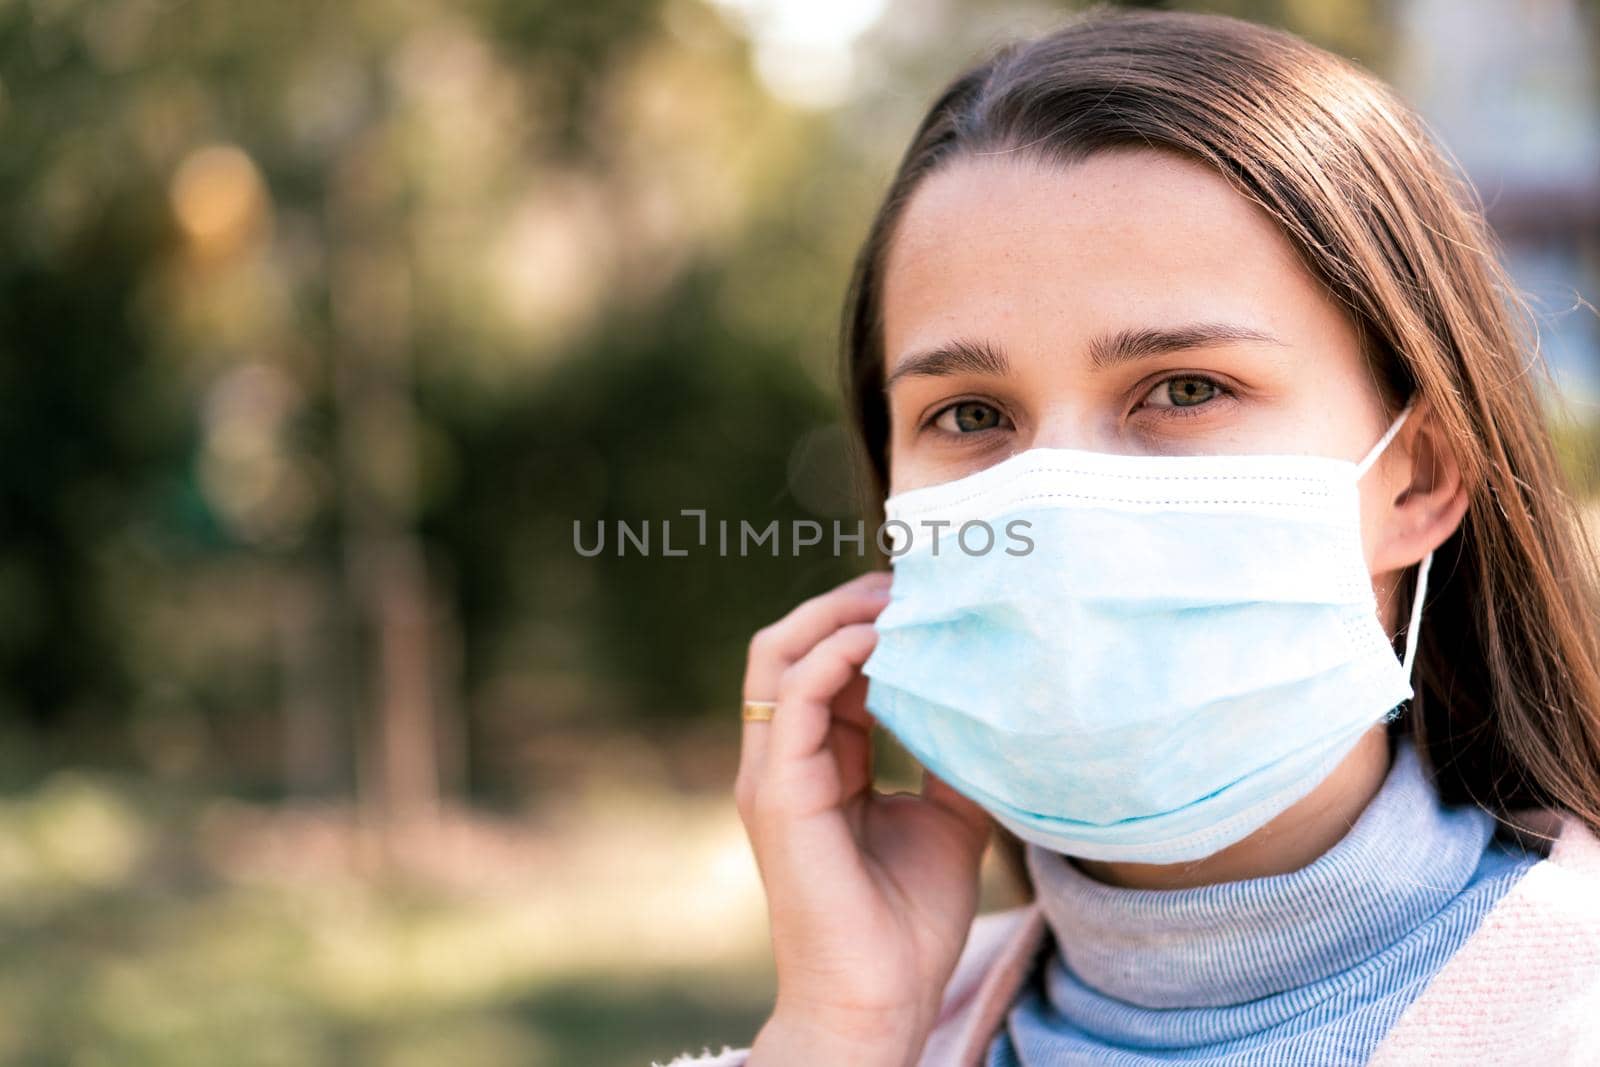 care, infants, spring, coronavirus and quarantine concept - Young cute long haired woman European Caucasian Slavic appearance put on blue medical protective mask in midday sunlight backlight in park